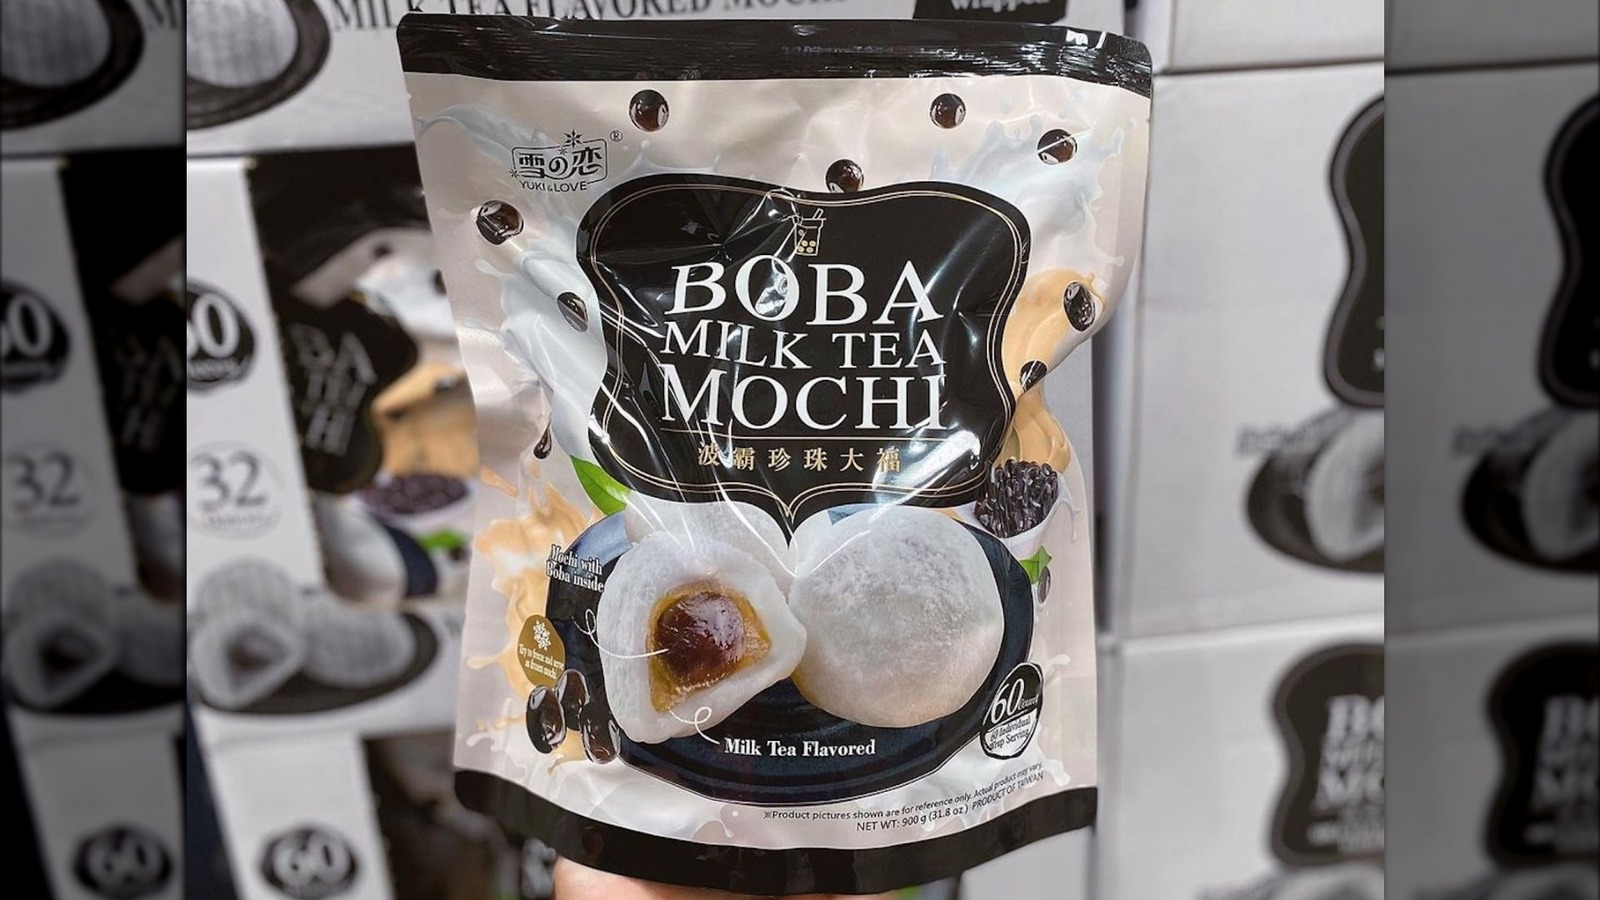 Costco Shoppers Are Freaking Out Over This Boba Milk Tea Mochi